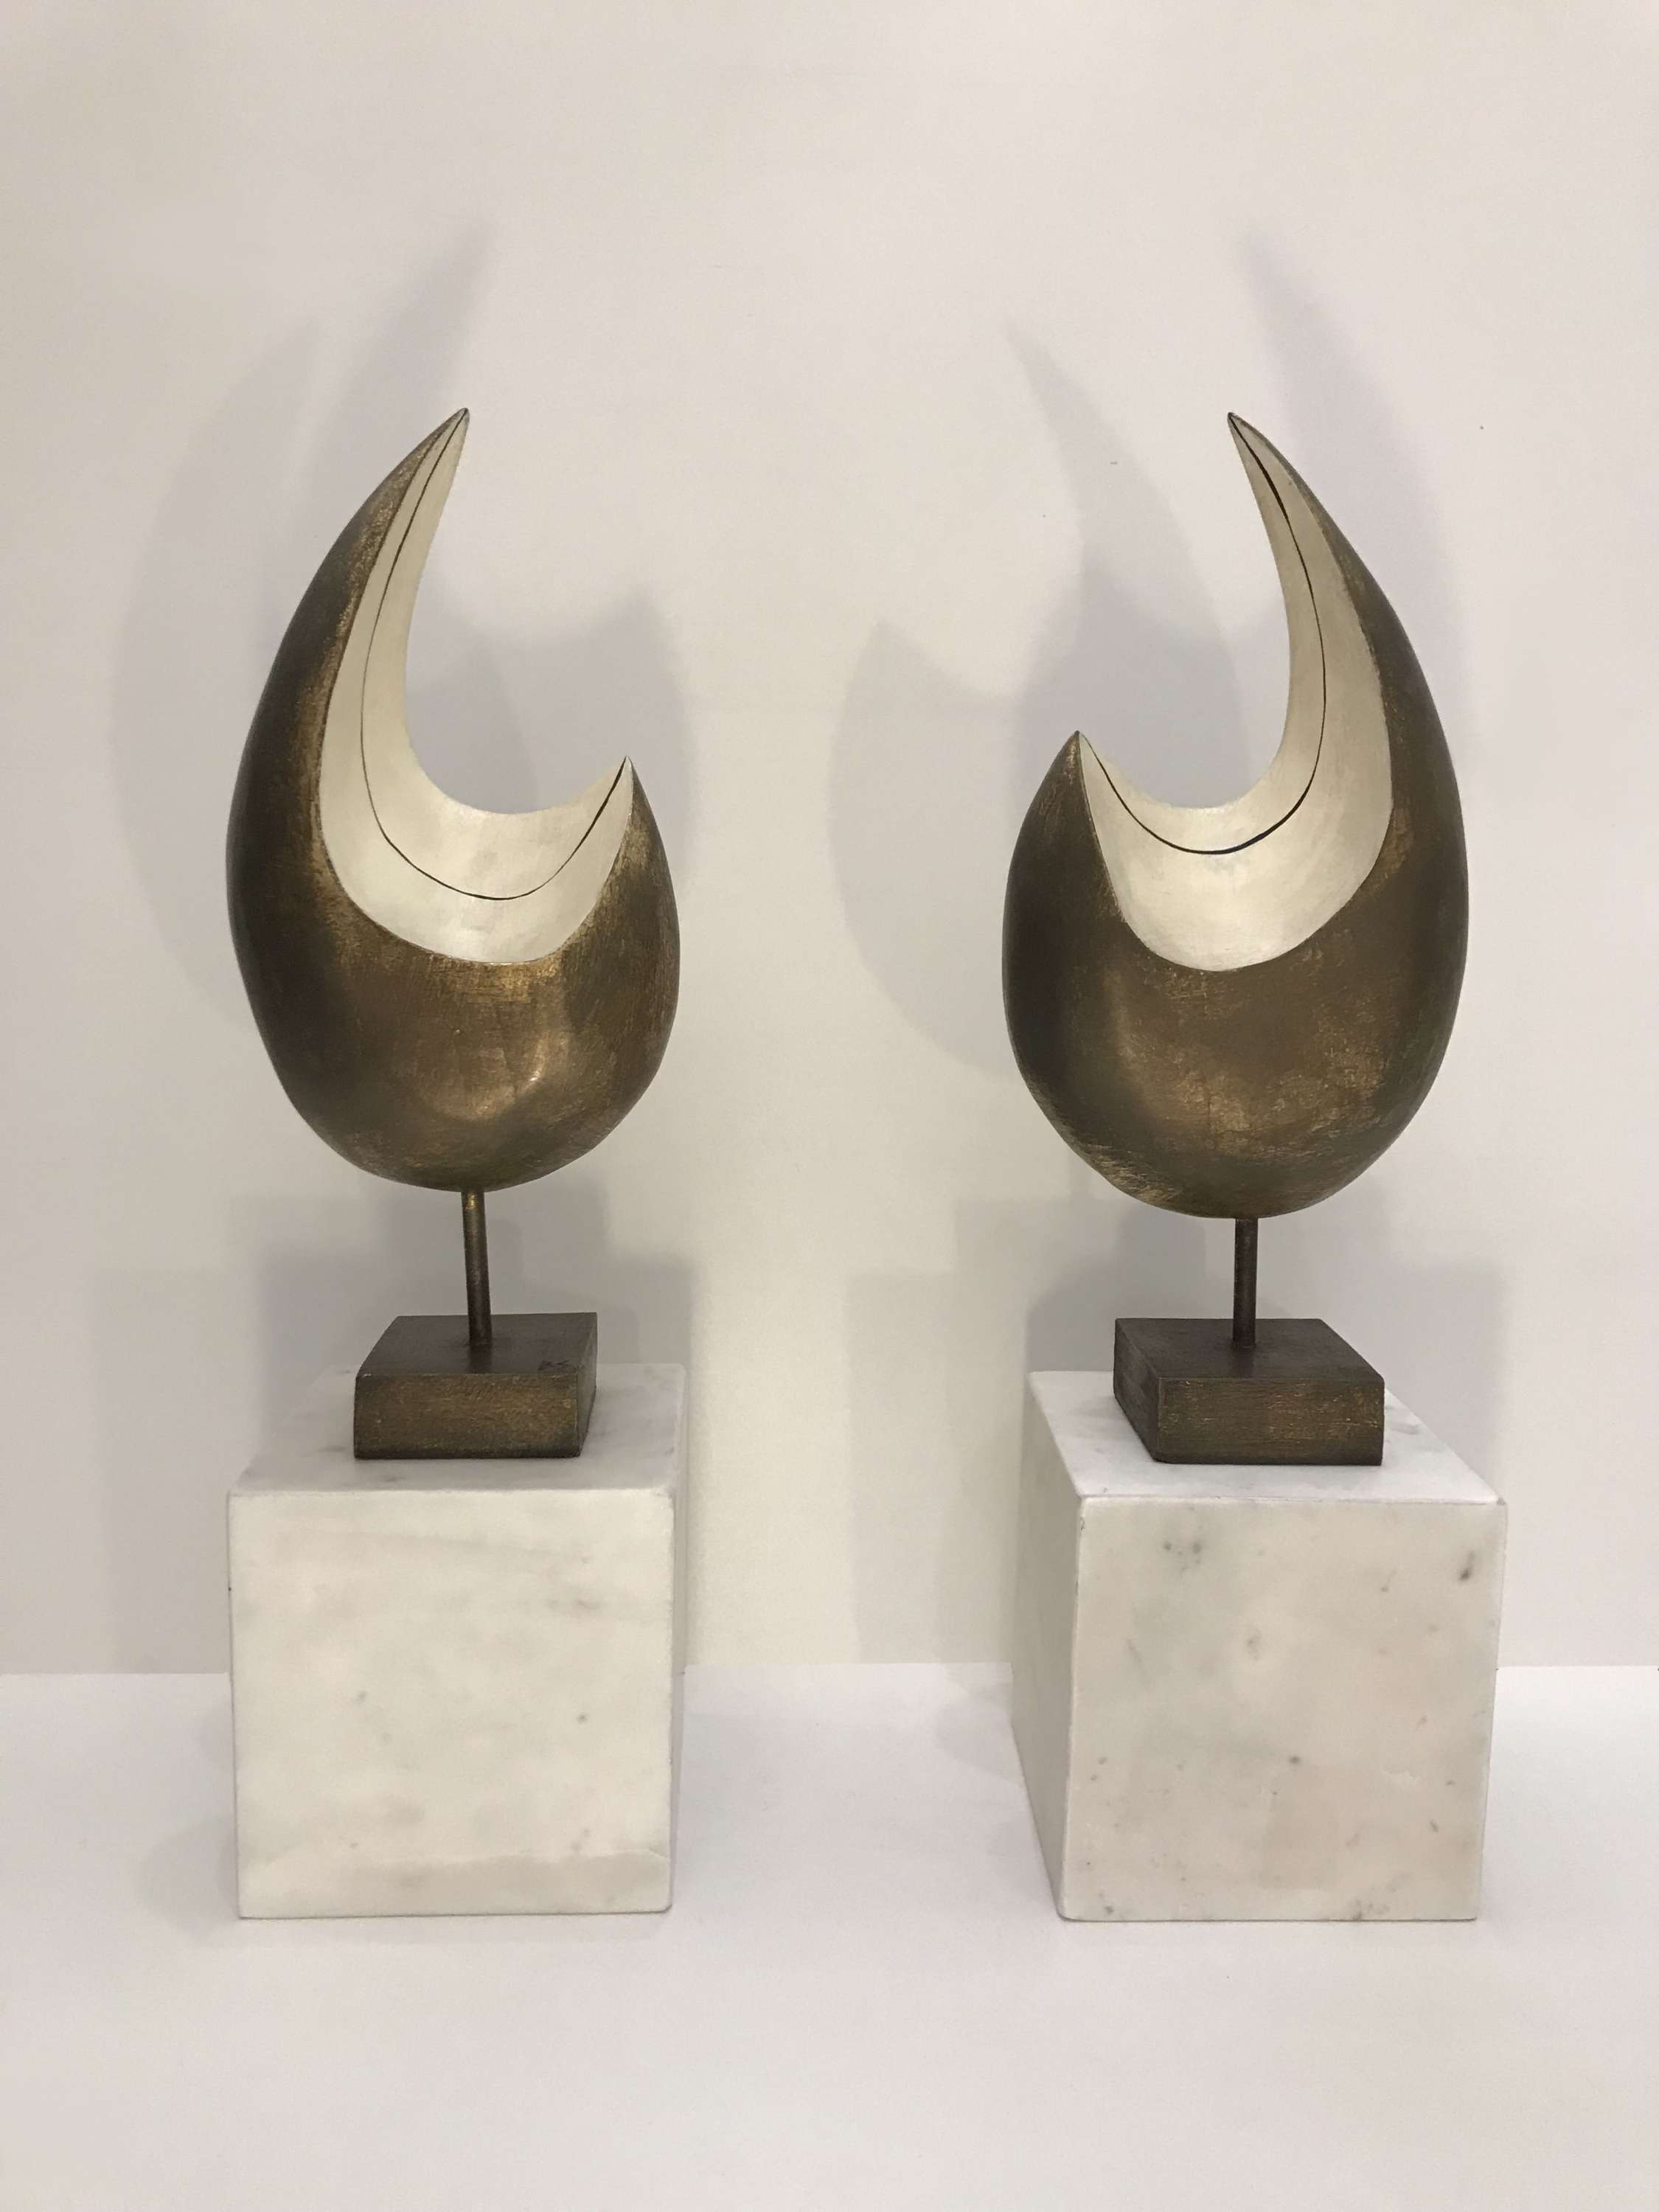 SCULPTURE 'Crescent' Left & Right Study, Maquette Sculpture of Wood, Steel, Clay, Paint with Bronze Finish on Marble Plinth